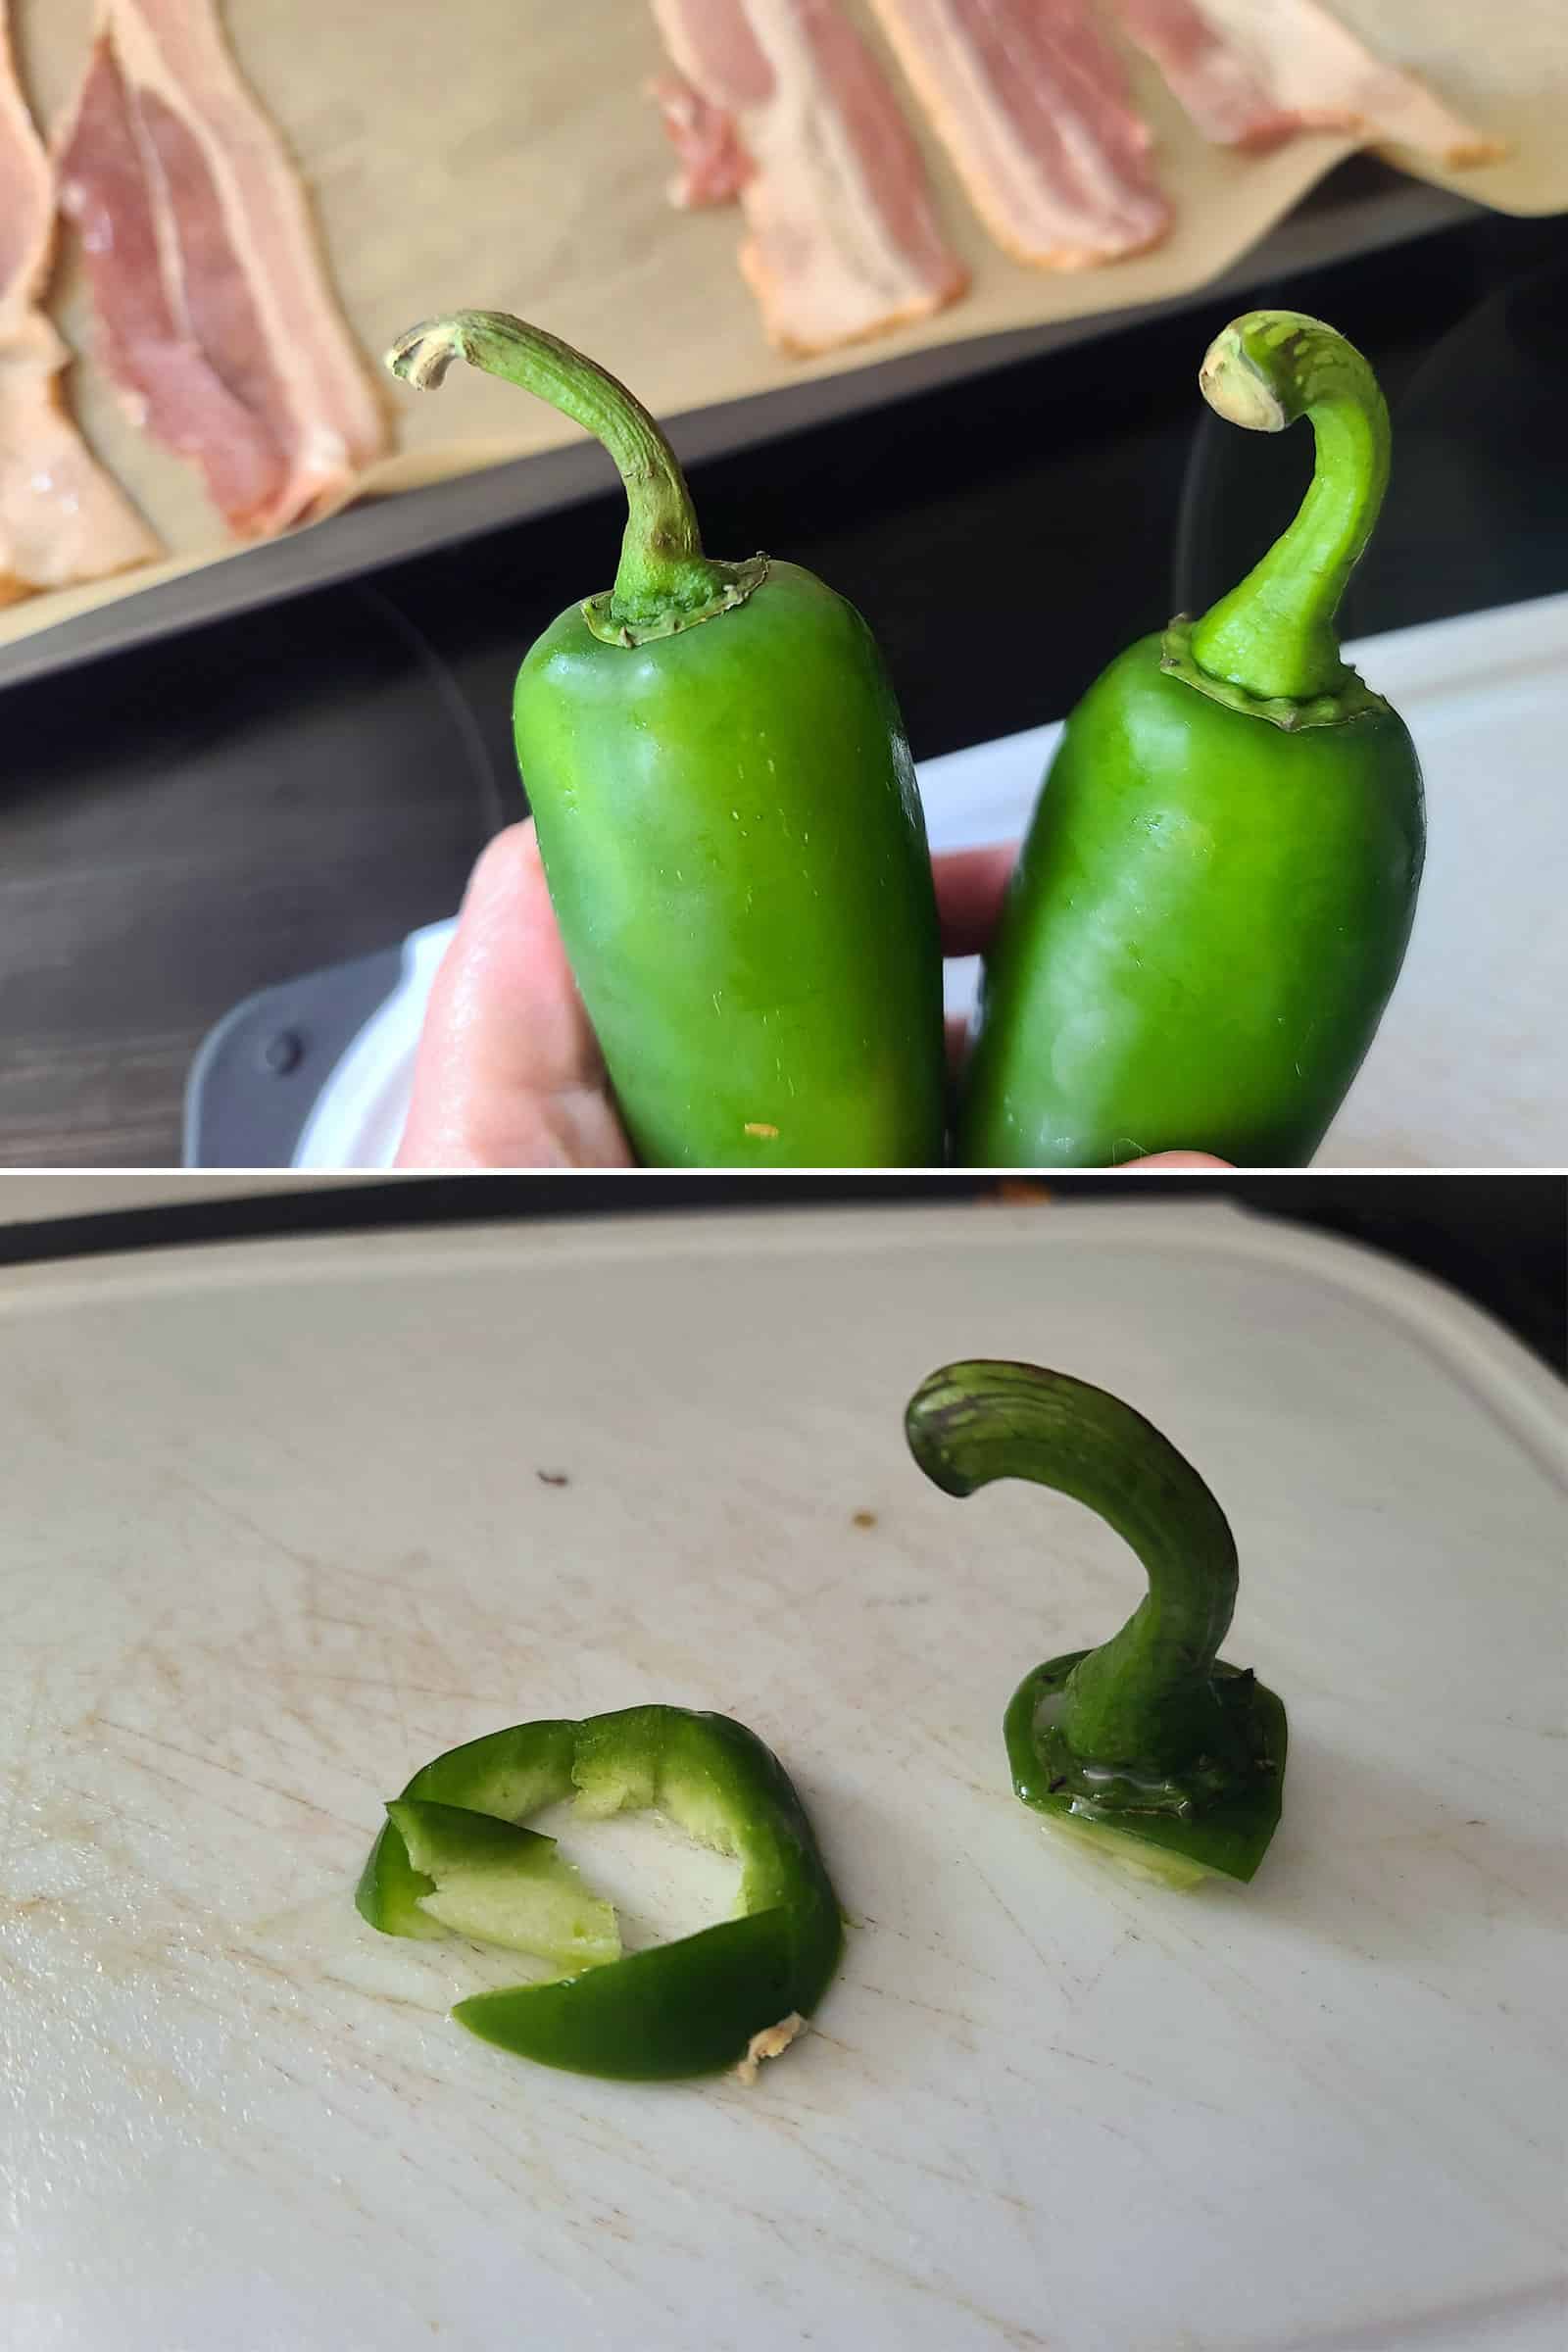 A 2 part image showing a hand holding 2 jalapenos, and the stem of one on a cutting board.